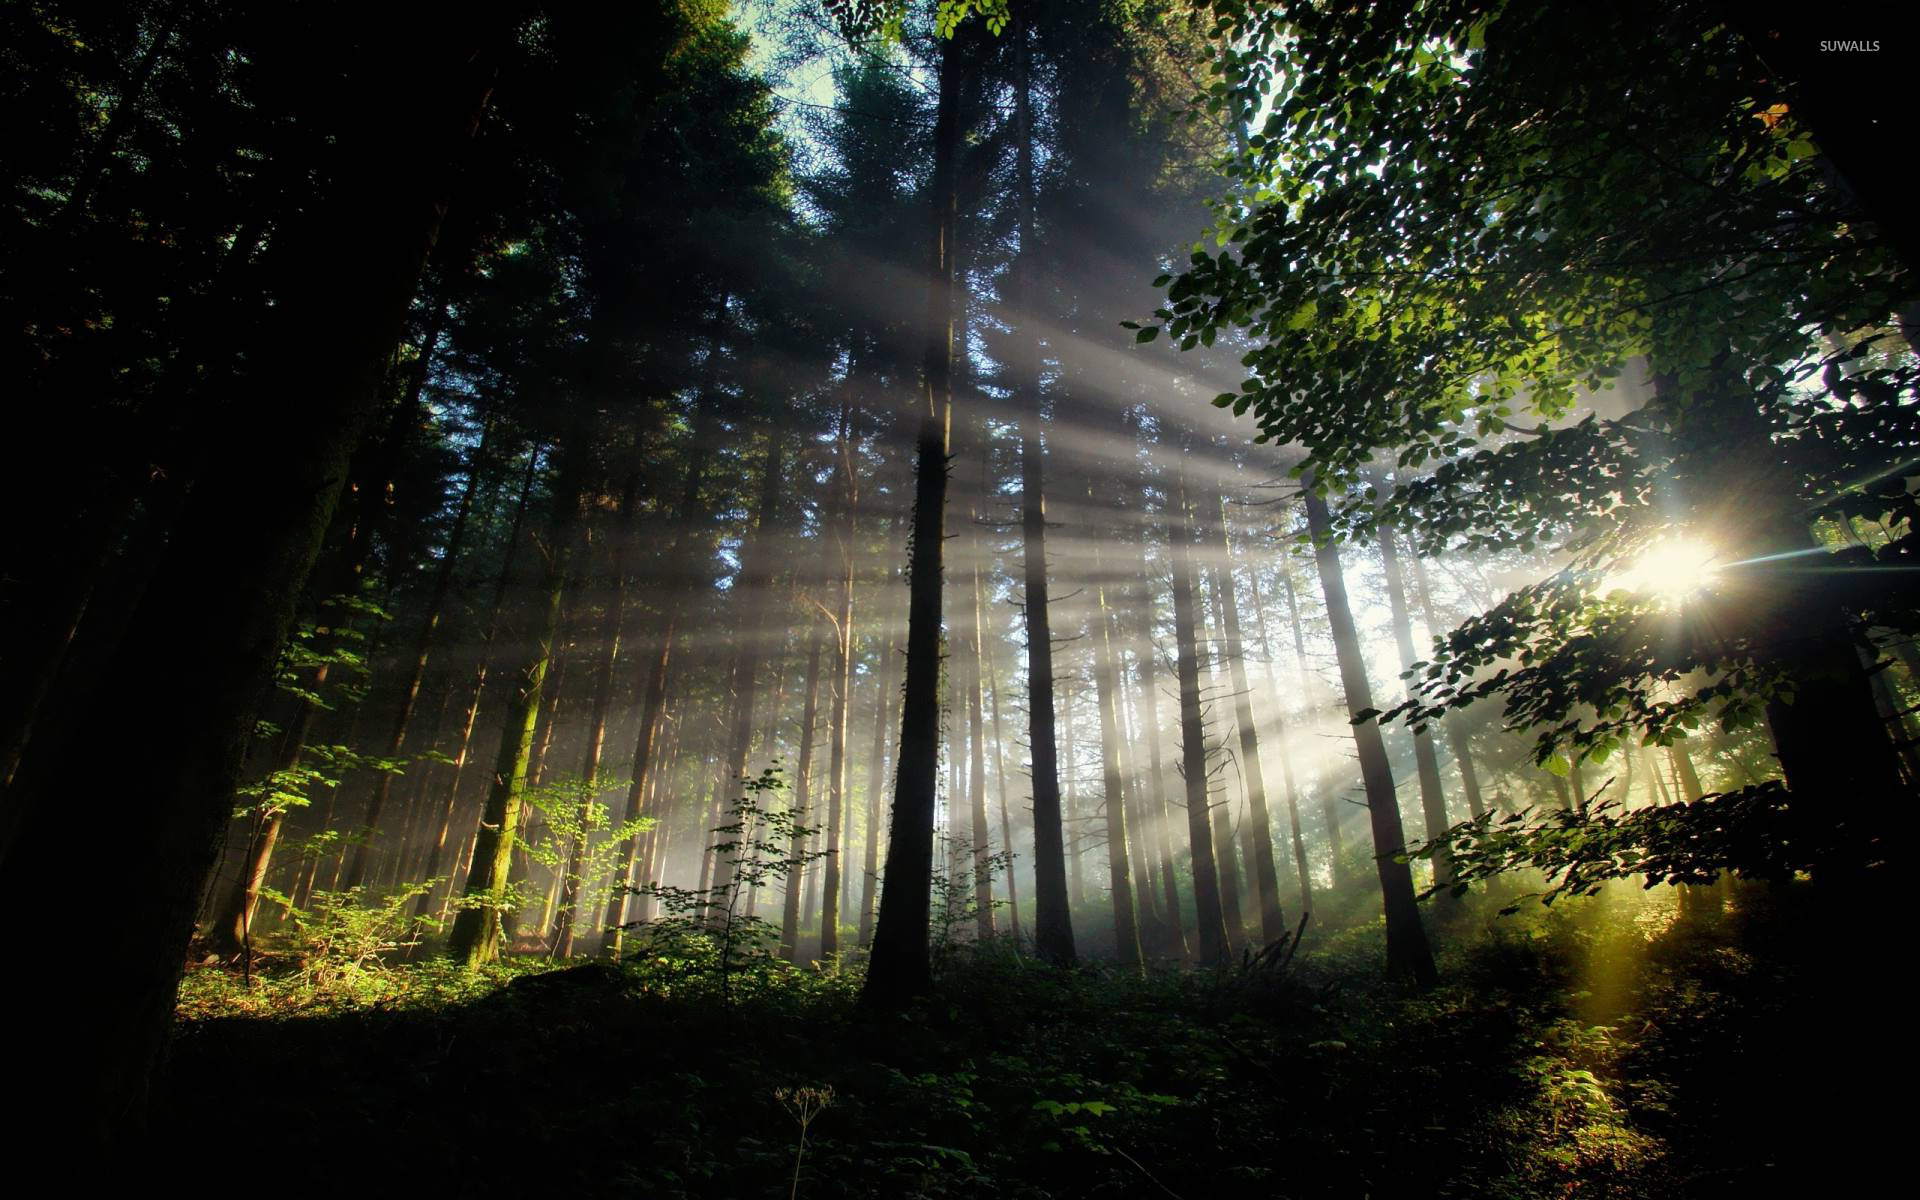 Sun shining through the forest wallpaper - Nature wallpapers - #14791